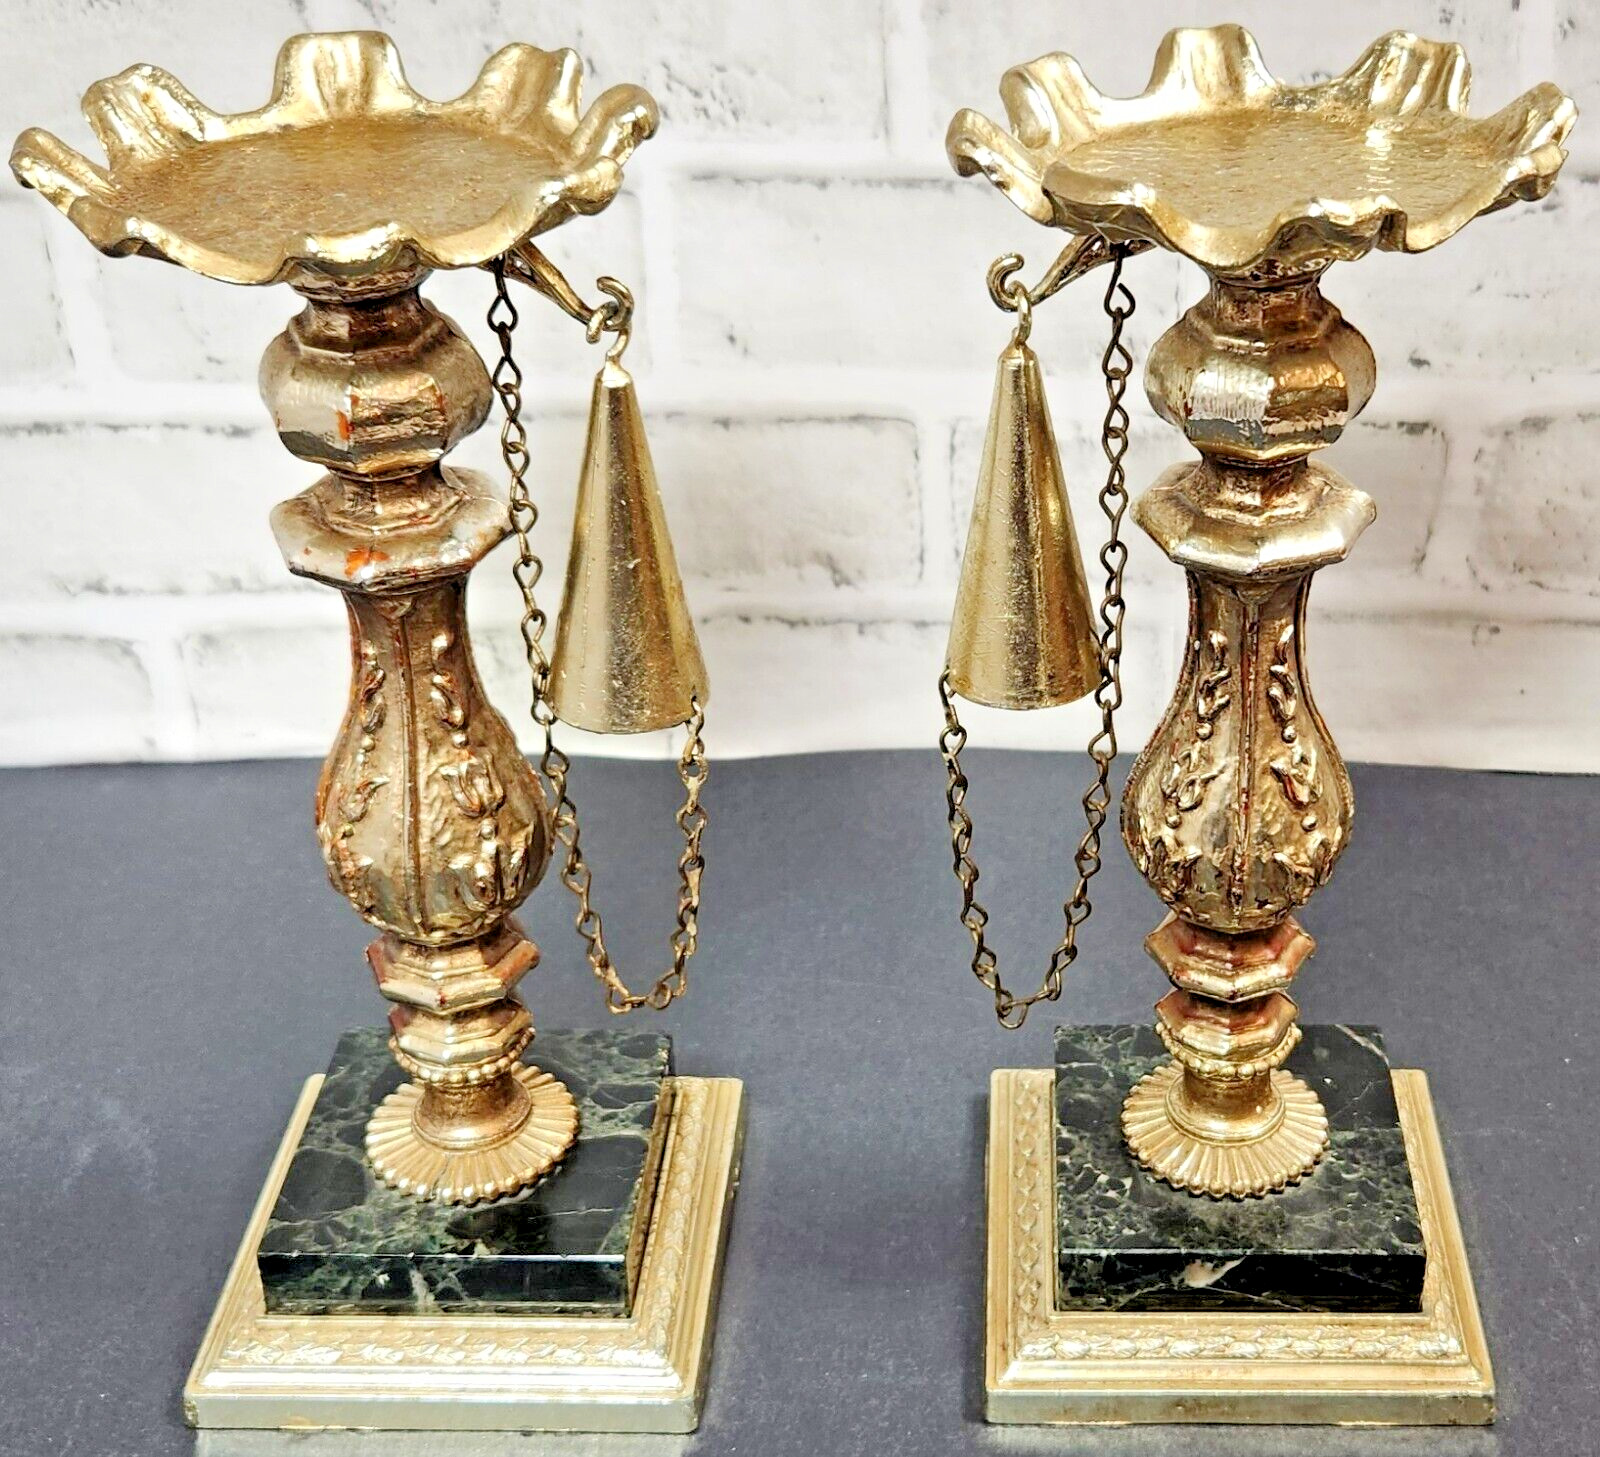 VTG Mid Century Candle Holders Snuffers Baroque Style Dilly Mfg Co Ornate /Italy